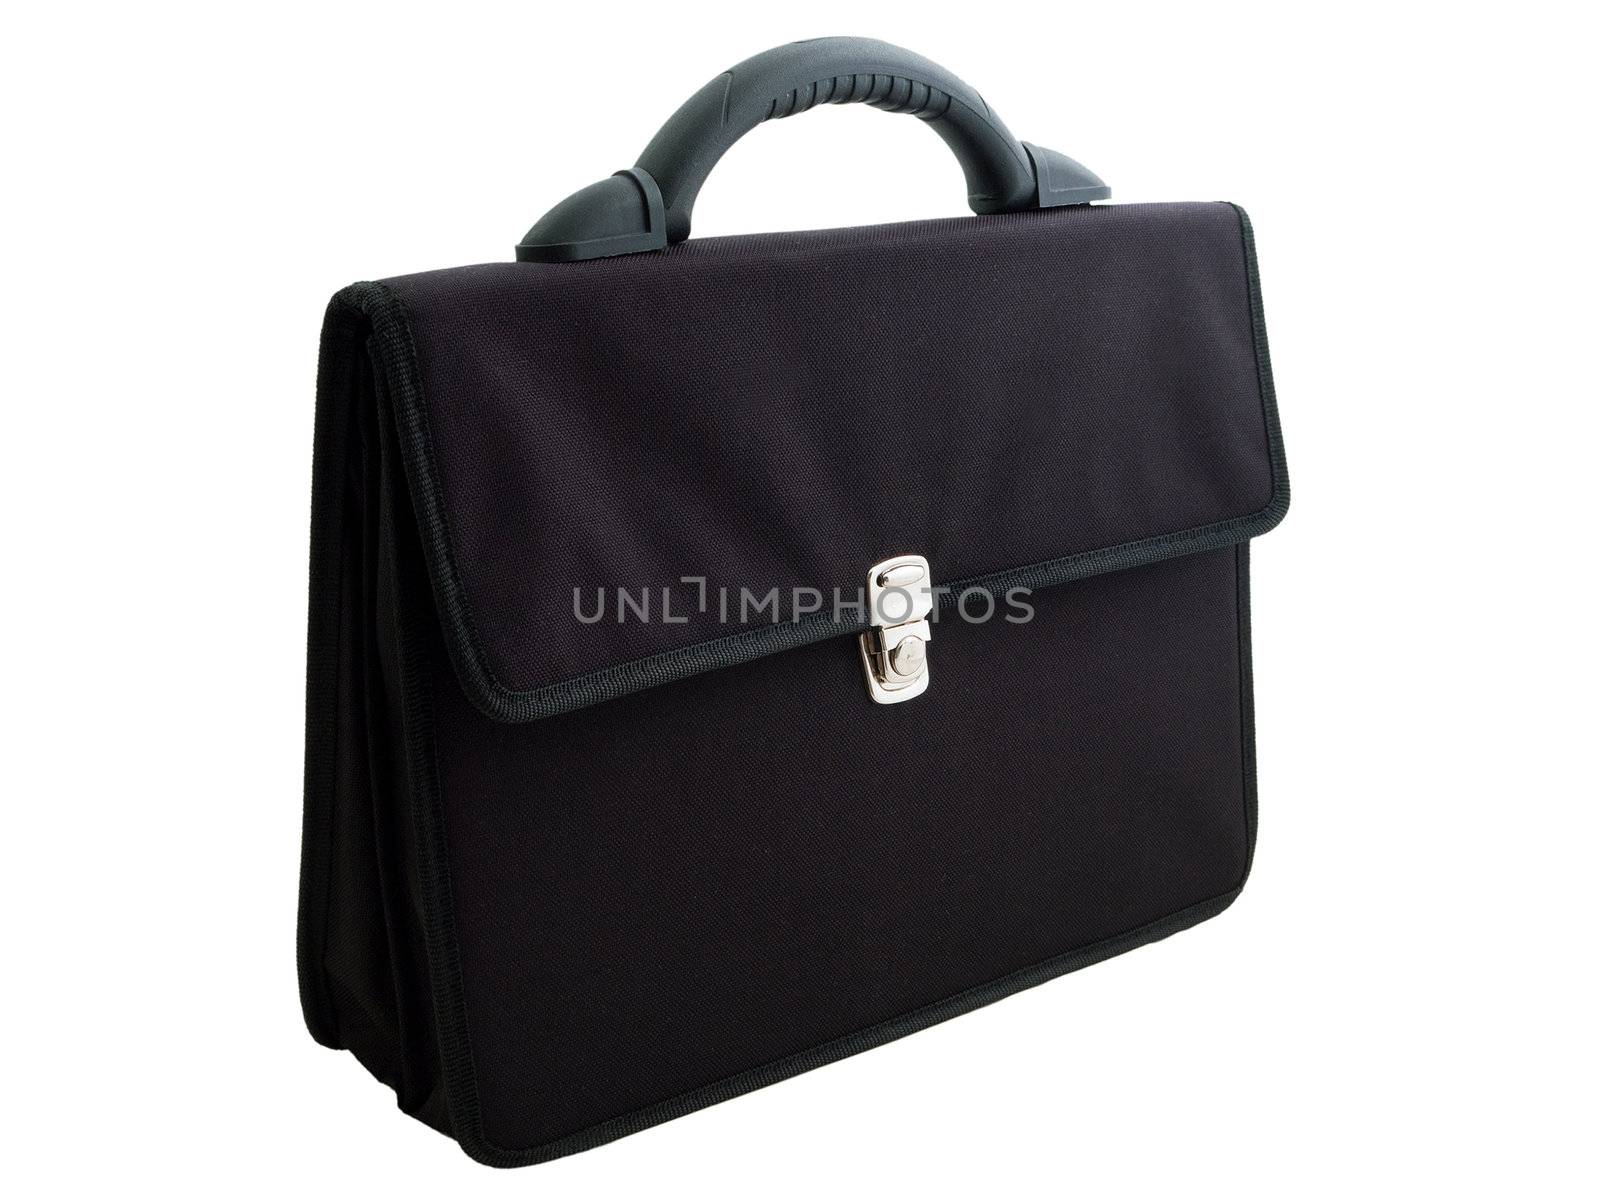 Business luggage briefcase or suitcase isolated